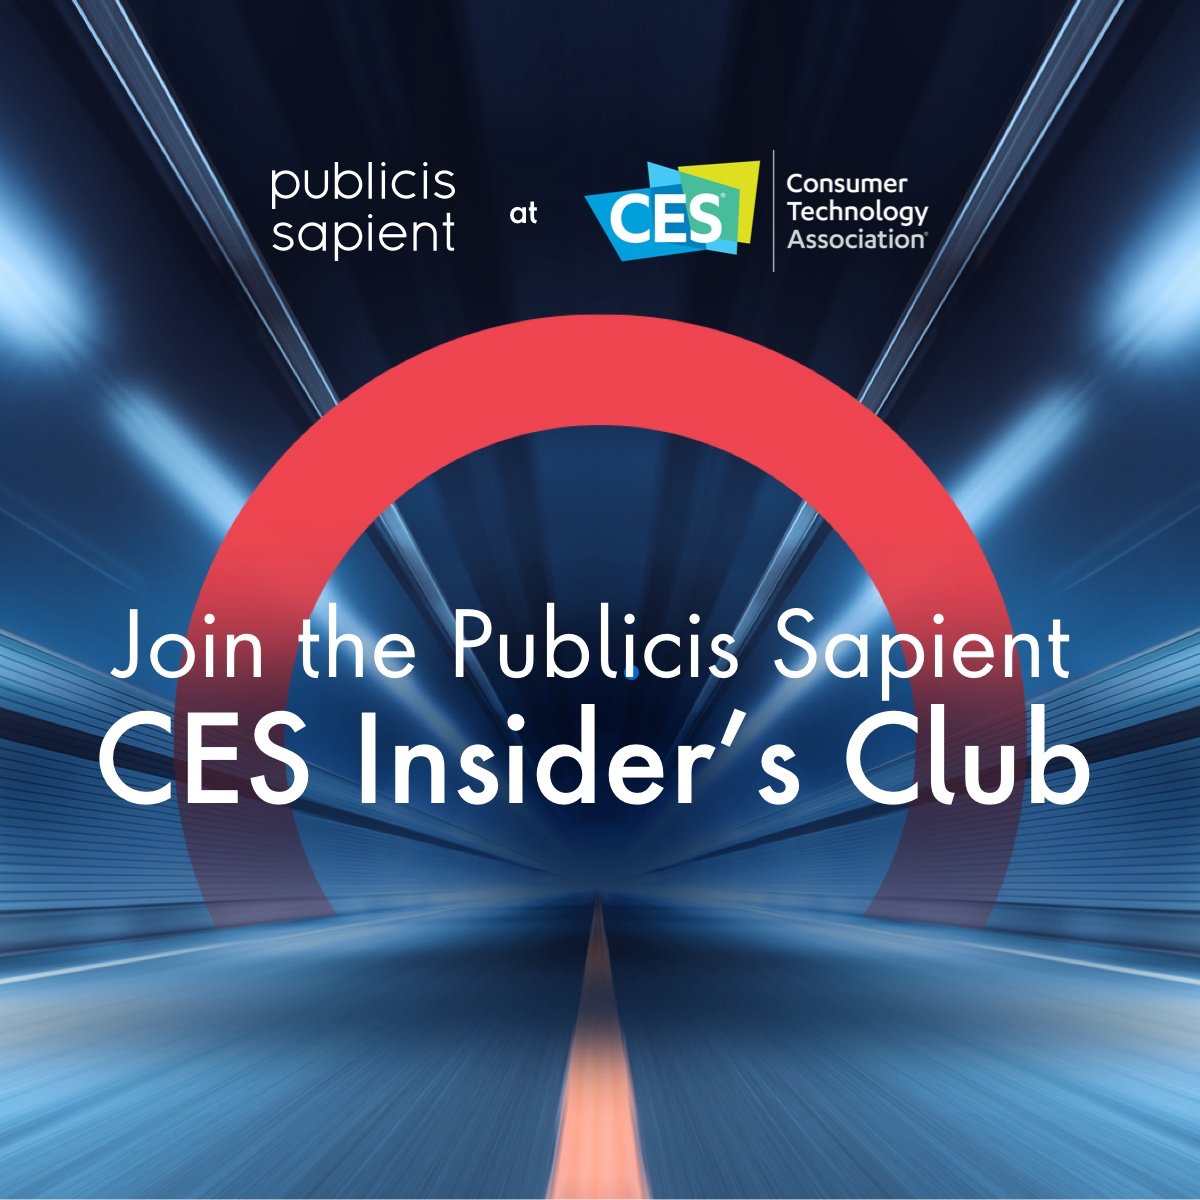 Pumped about #CES? See you there! Drop me a line so we can talk #GenAI and the many ways it can supercharge #digitalbusinesstransformation. Be in the know as it unfolds! events.publicissapient.com/publicissapien… bit.ly/3vf5KOC